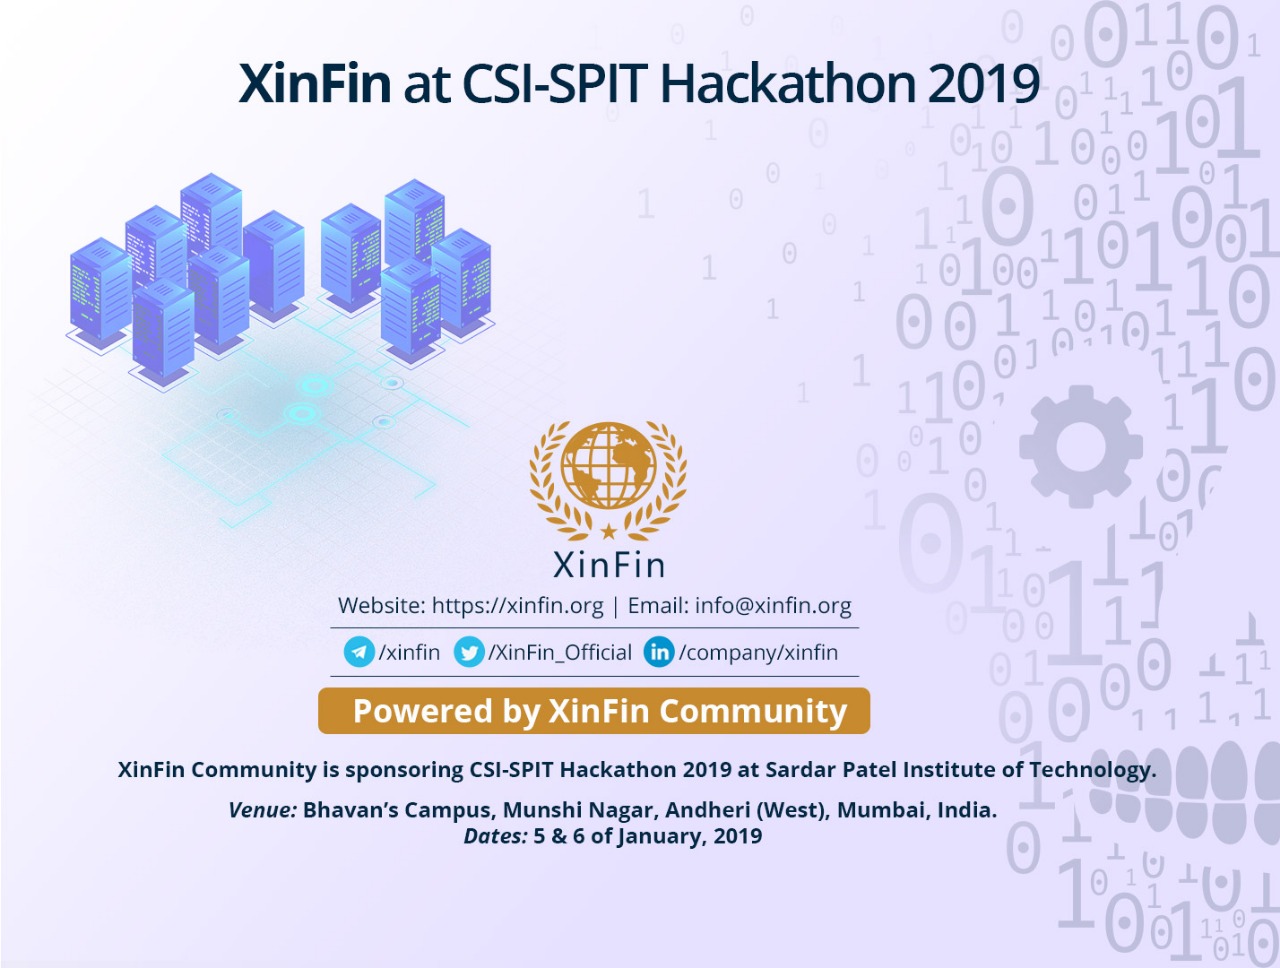 XinFin as technical sponsor at SPIT Hackathon